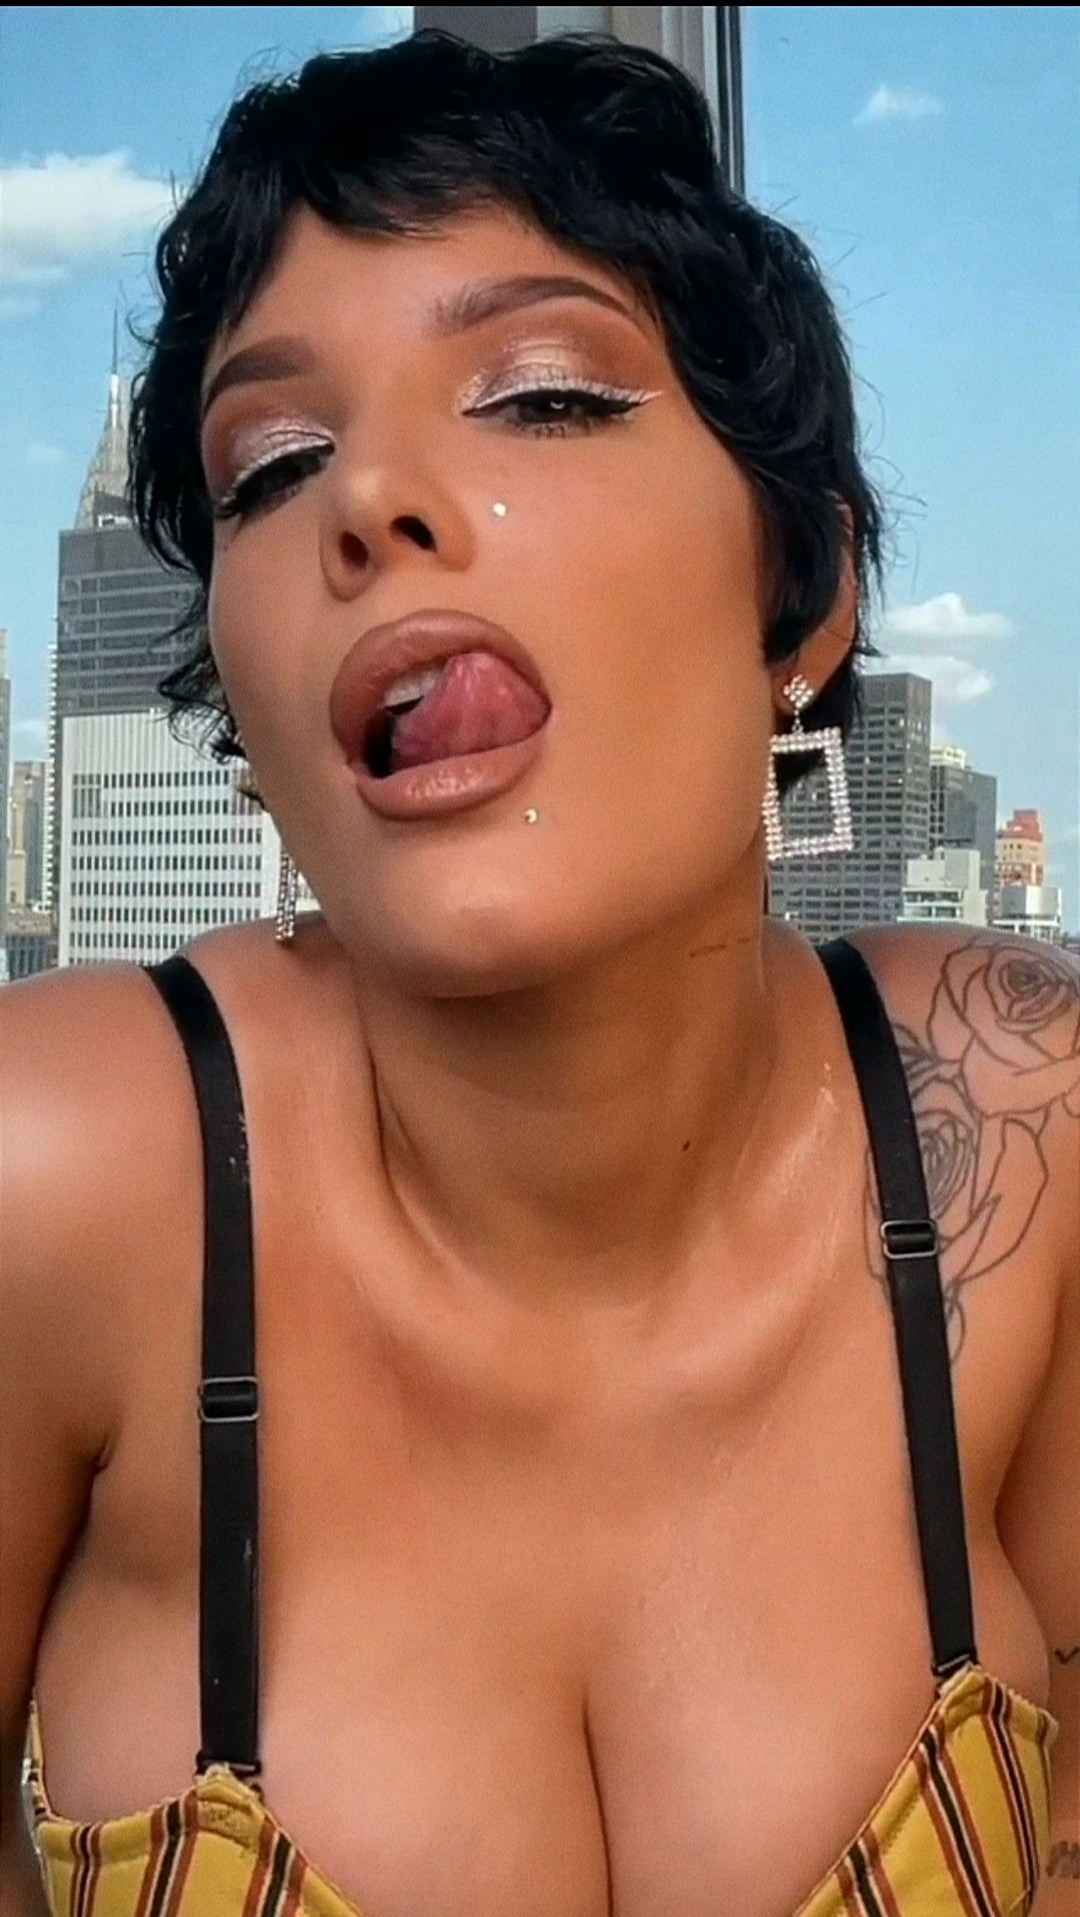 Halsey and her mommy tits are the stuff of dreams